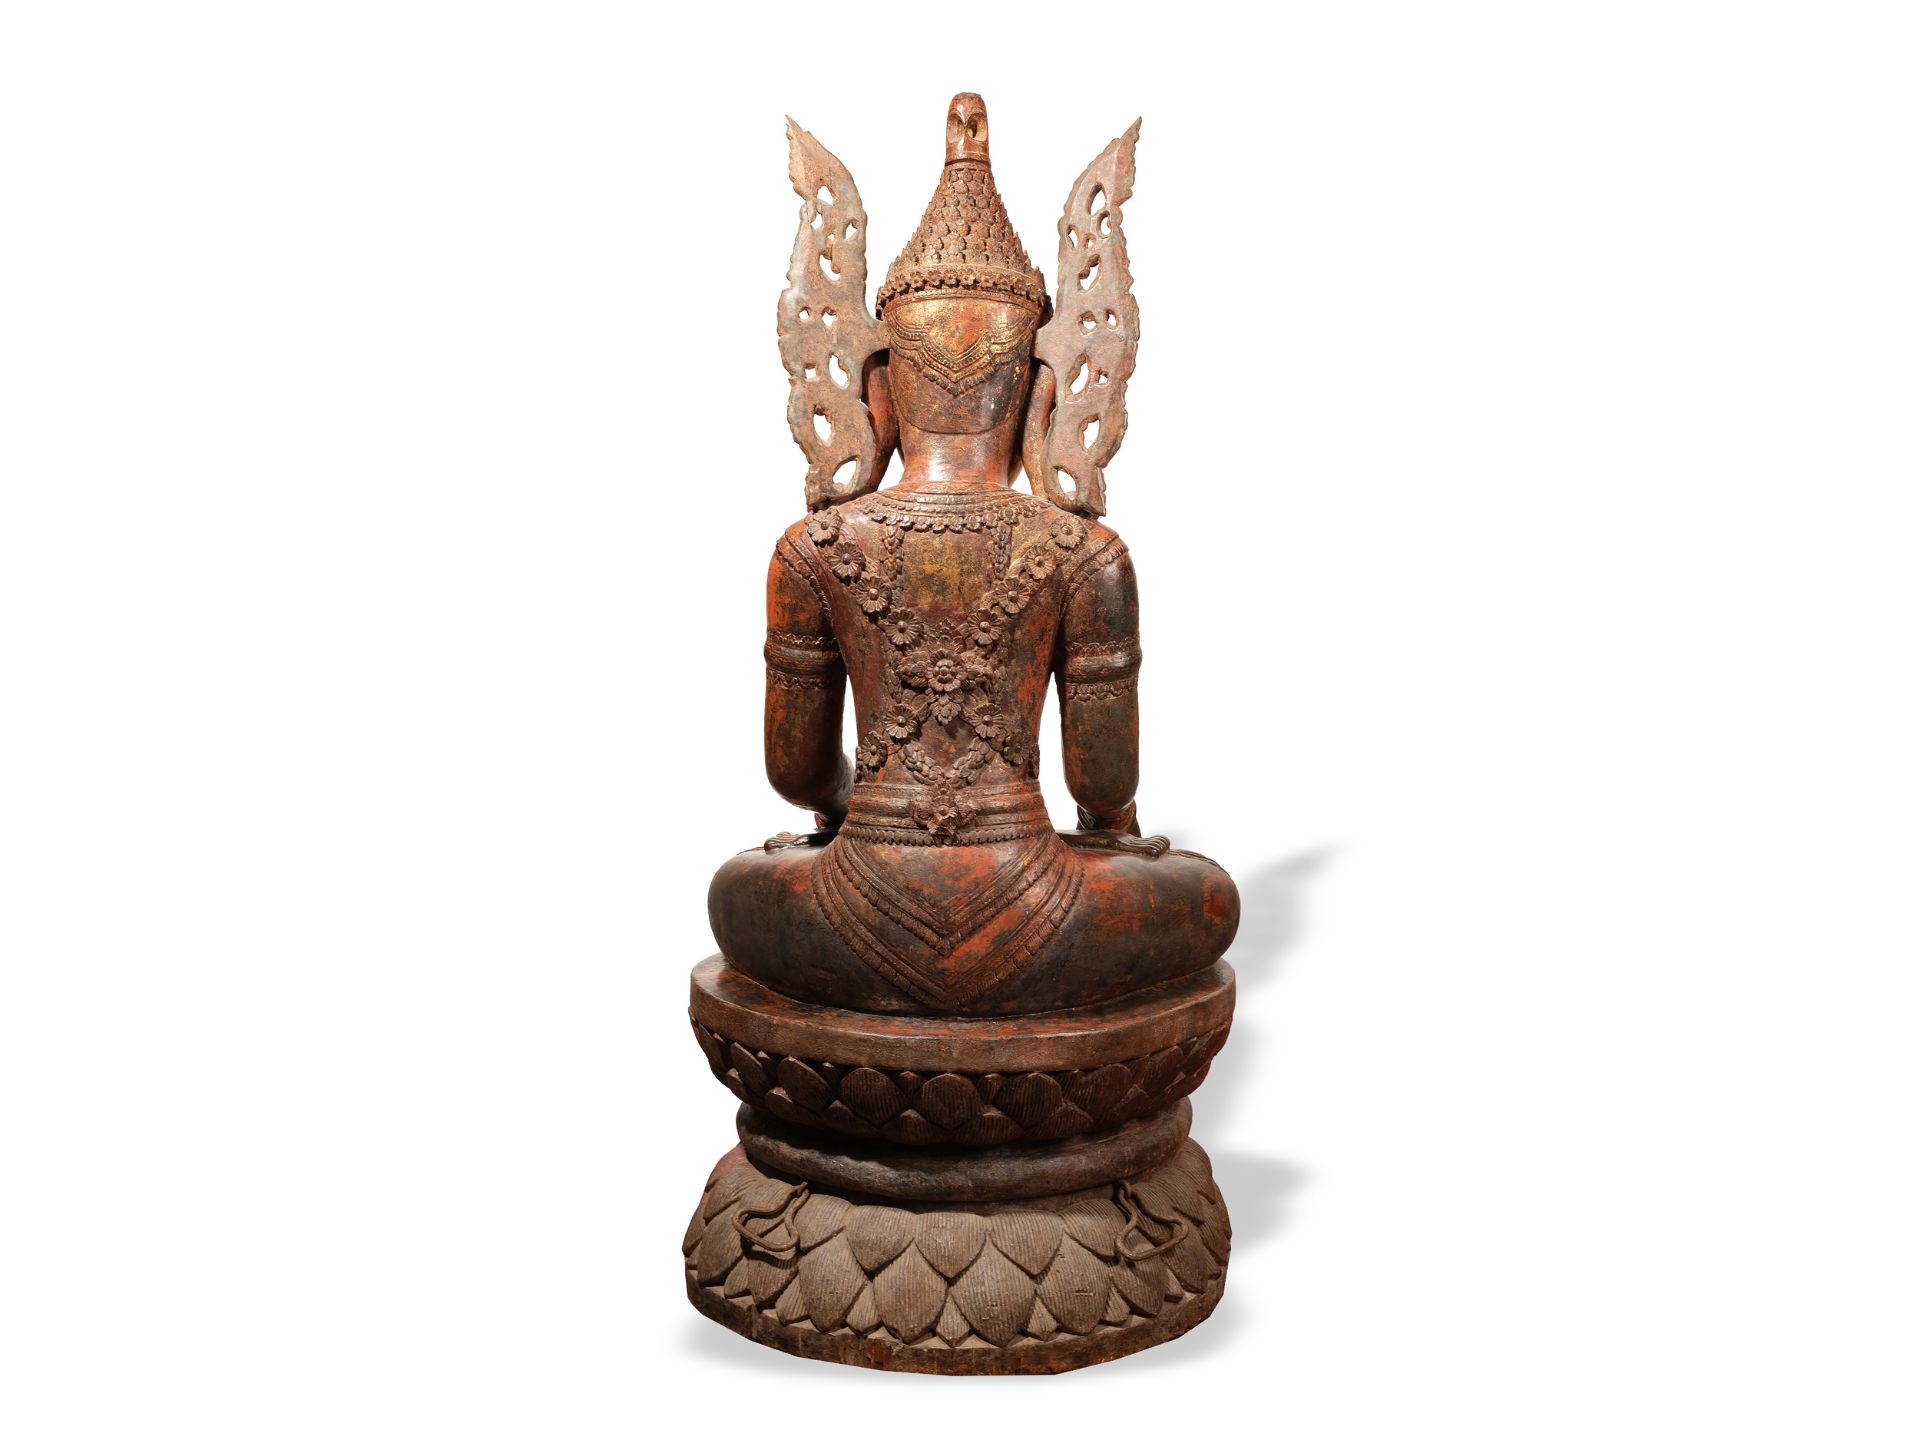 Large lacquered wooden Buddha, Myanmar (Burma), Shan, 17th-18th century - Image 6 of 9